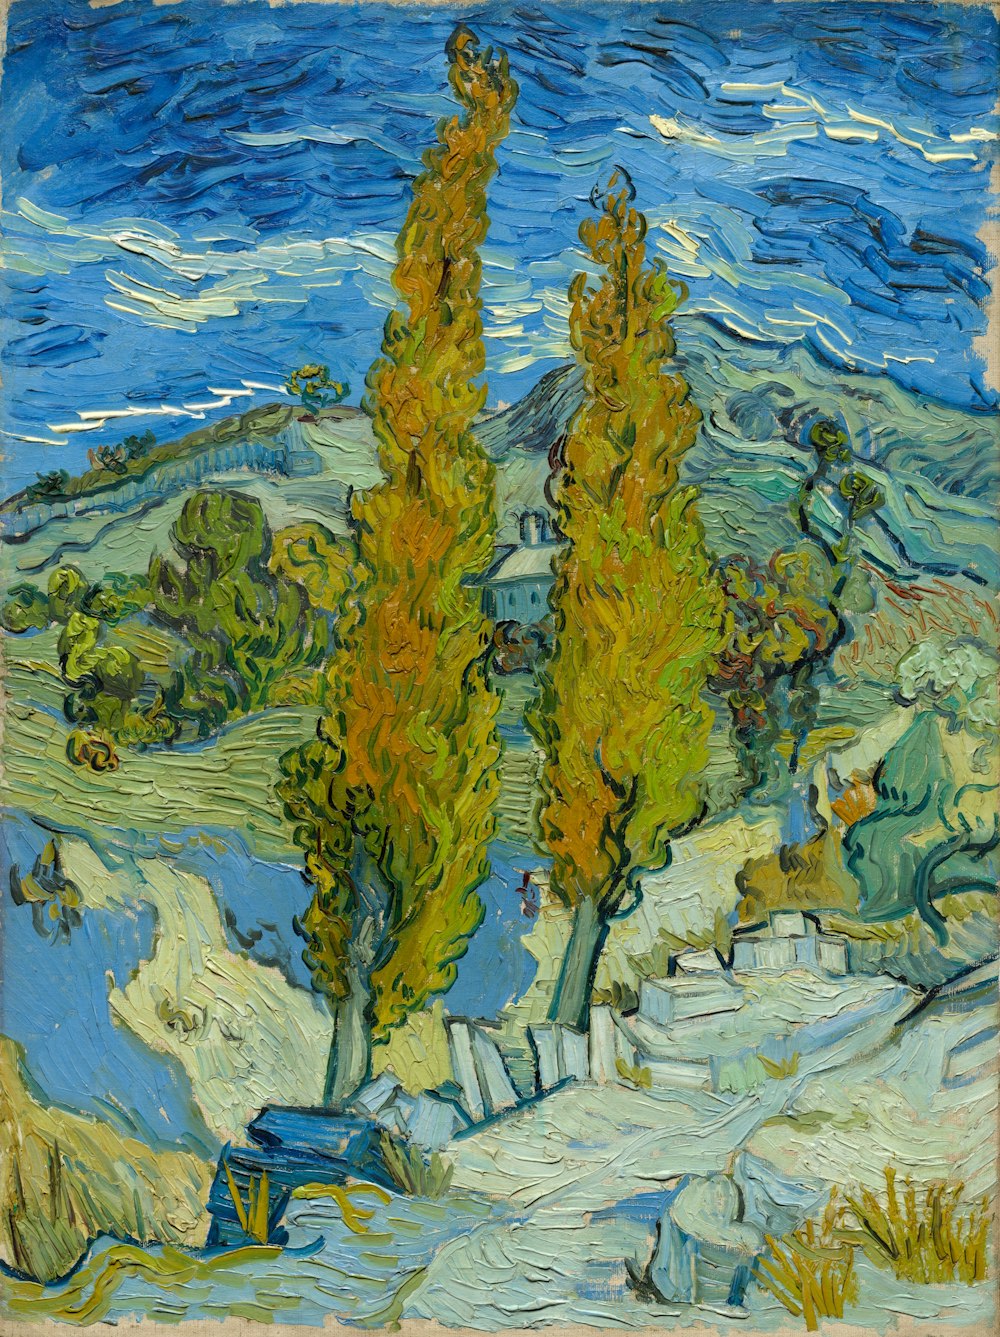 a painting of a landscape with trees in the foreground